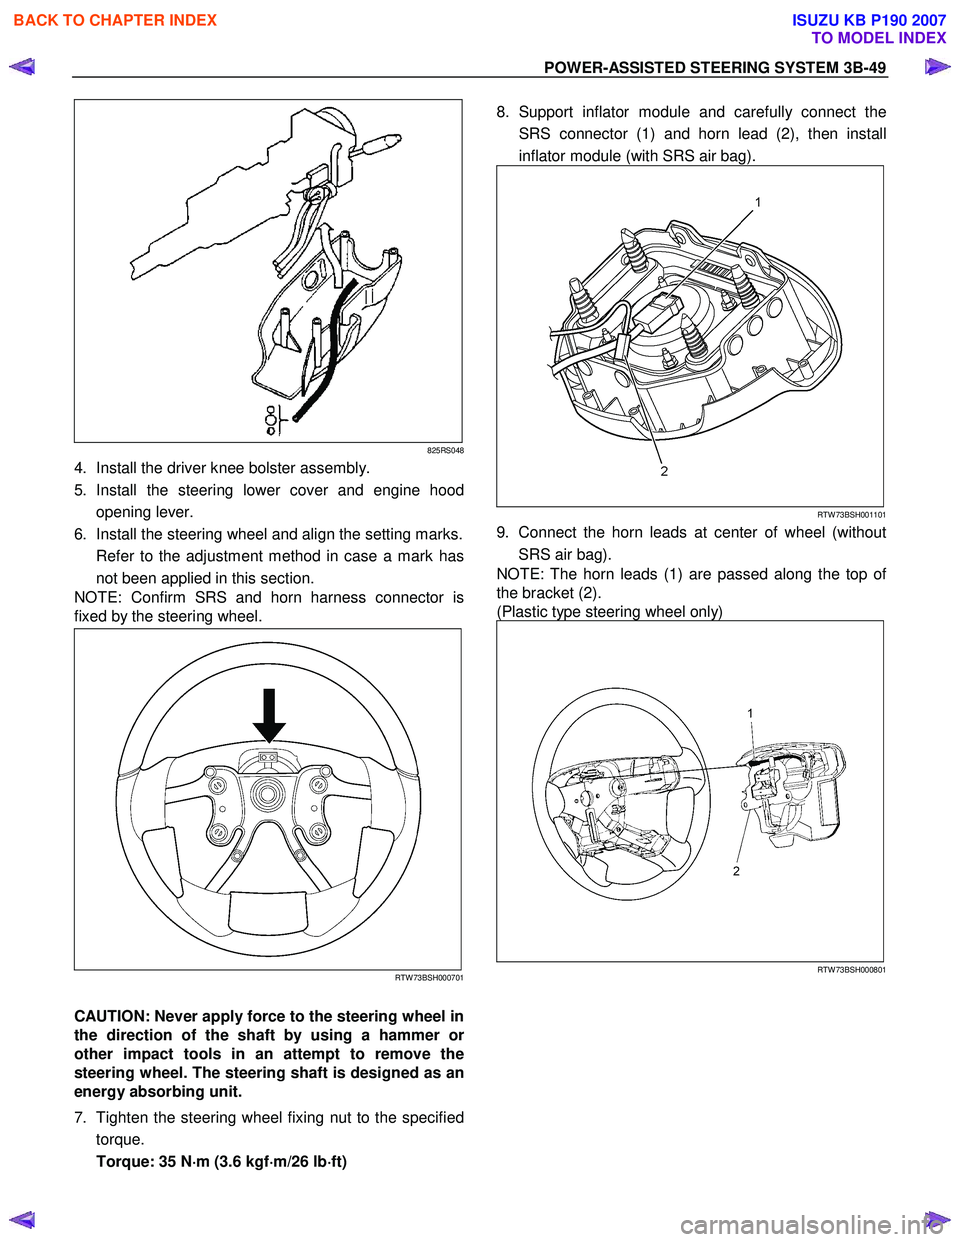 ISUZU KB P190 2007  Workshop Repair Manual POWER-ASSISTED STEERING SYSTEM 3B-49 
825RS048
4.  Install the driver knee bolster assembly.  
5. Install the steering lower cover and engine hood opening lever. 
6.  Install the steering wheel and al